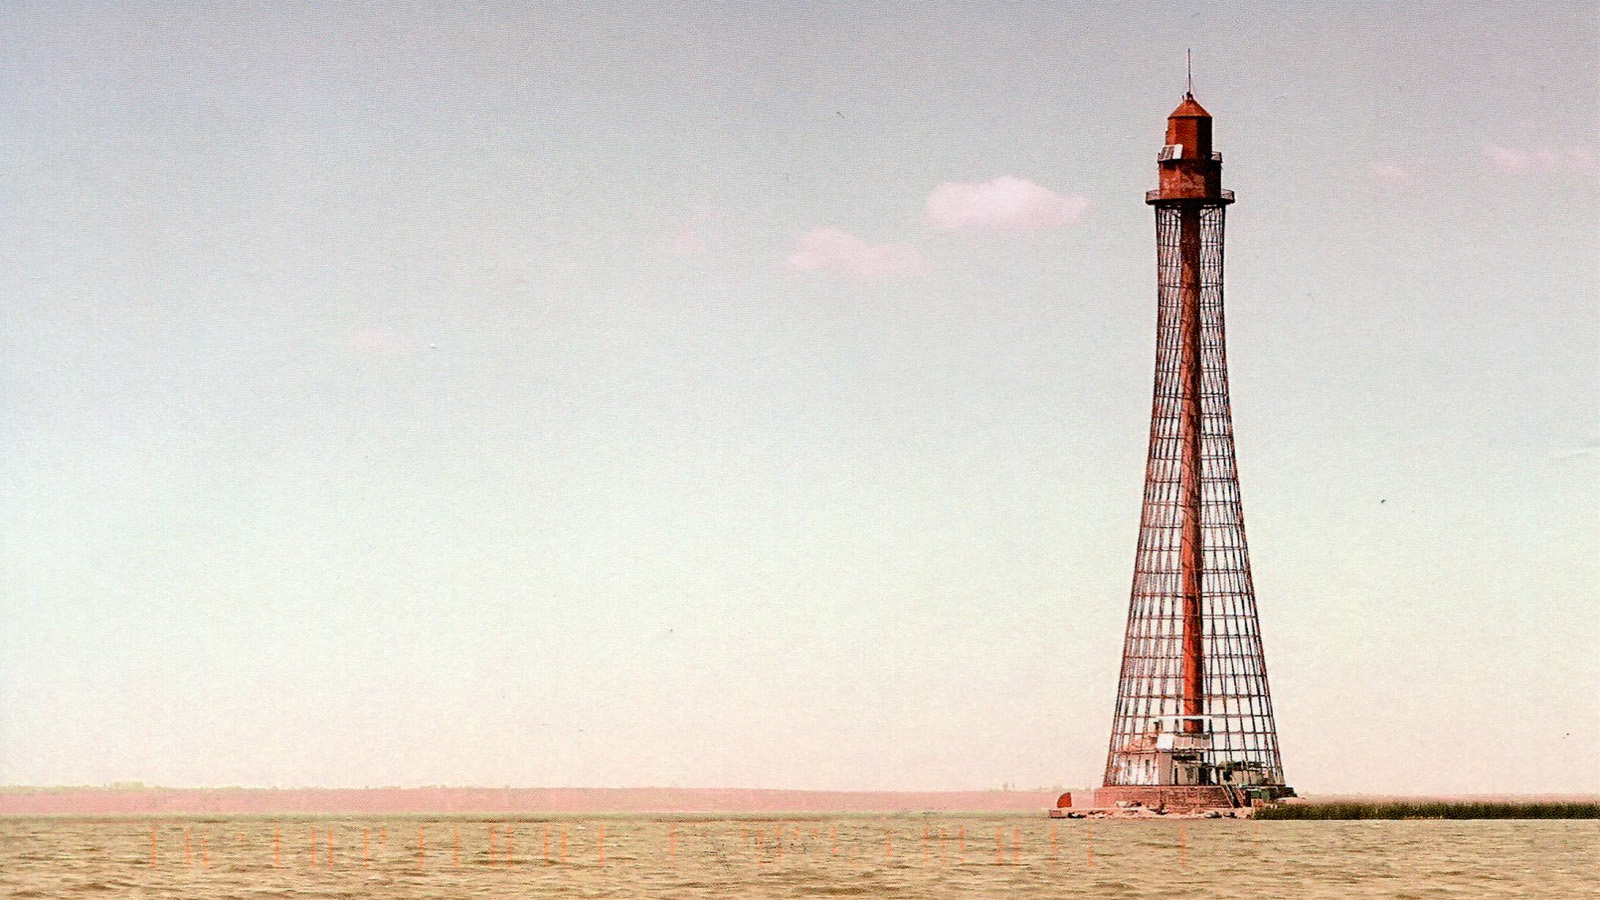 23 Lighthouses That Span A Millennia Of Sea Travel